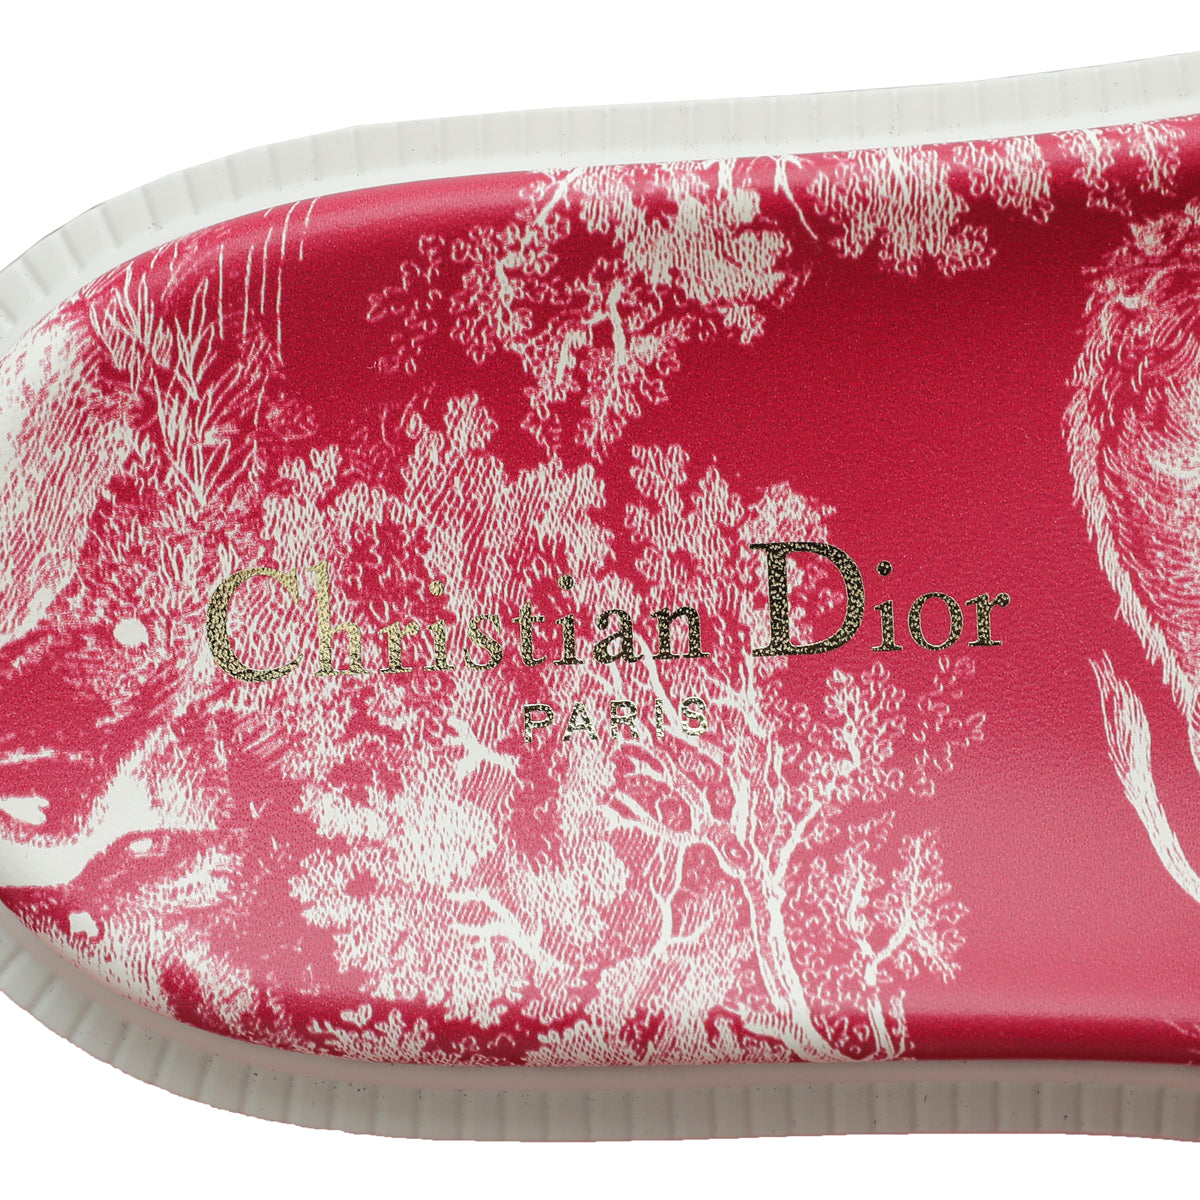 Christian Dior Red Dway Toile De Jouy Embroidered Flat Slide Sandals 36.5